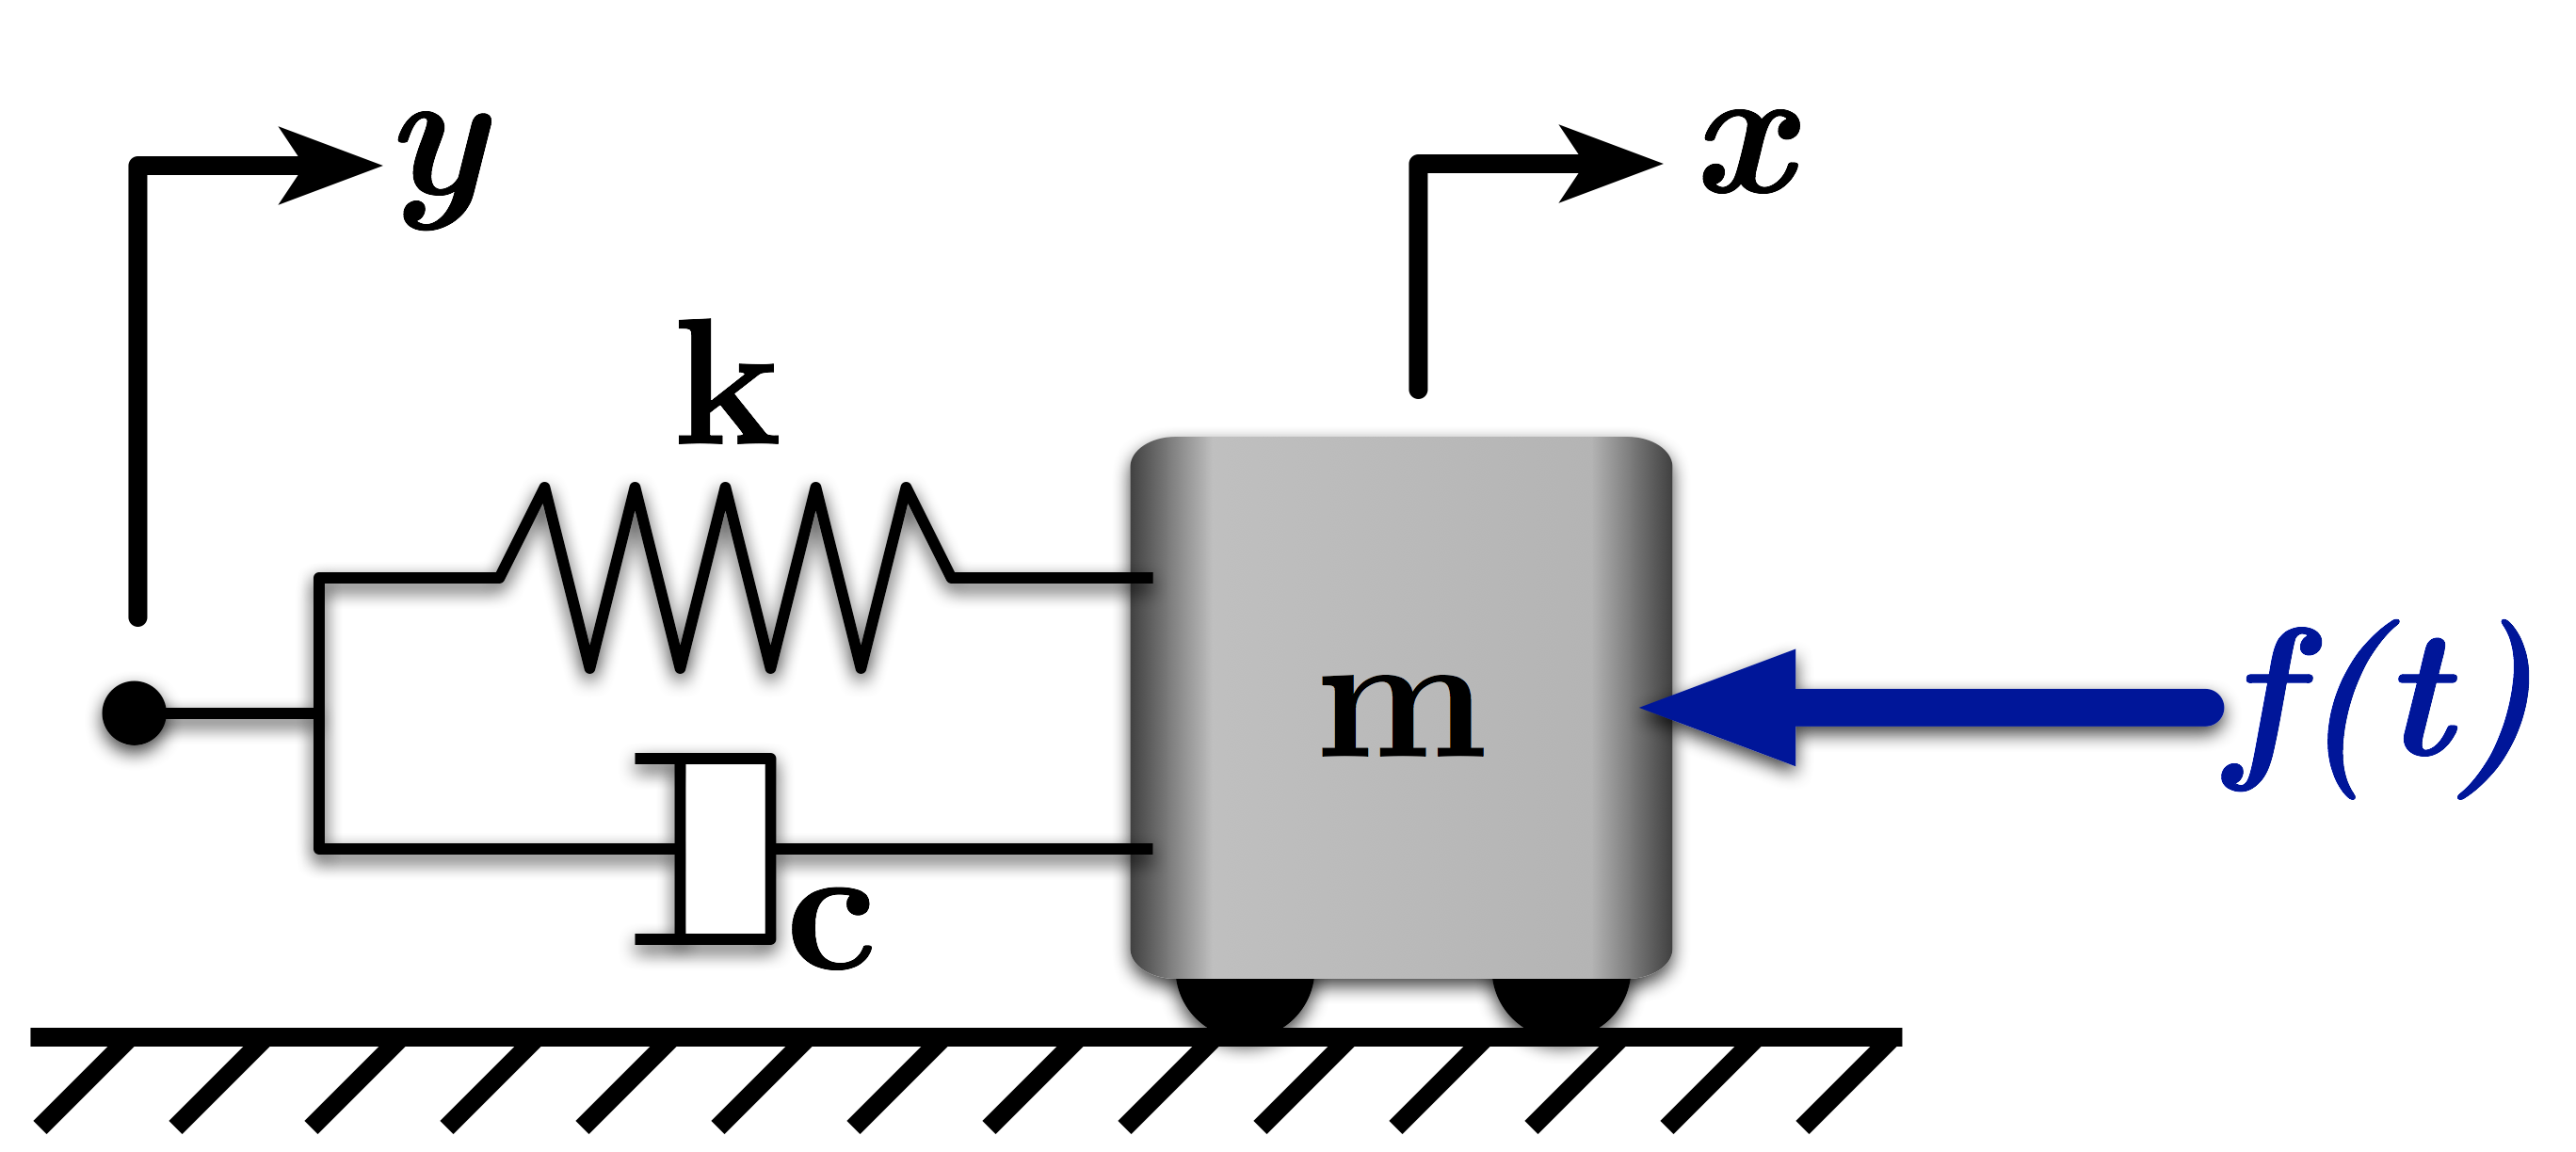 A Mass-Spring-Damper System with a Disturbance Force